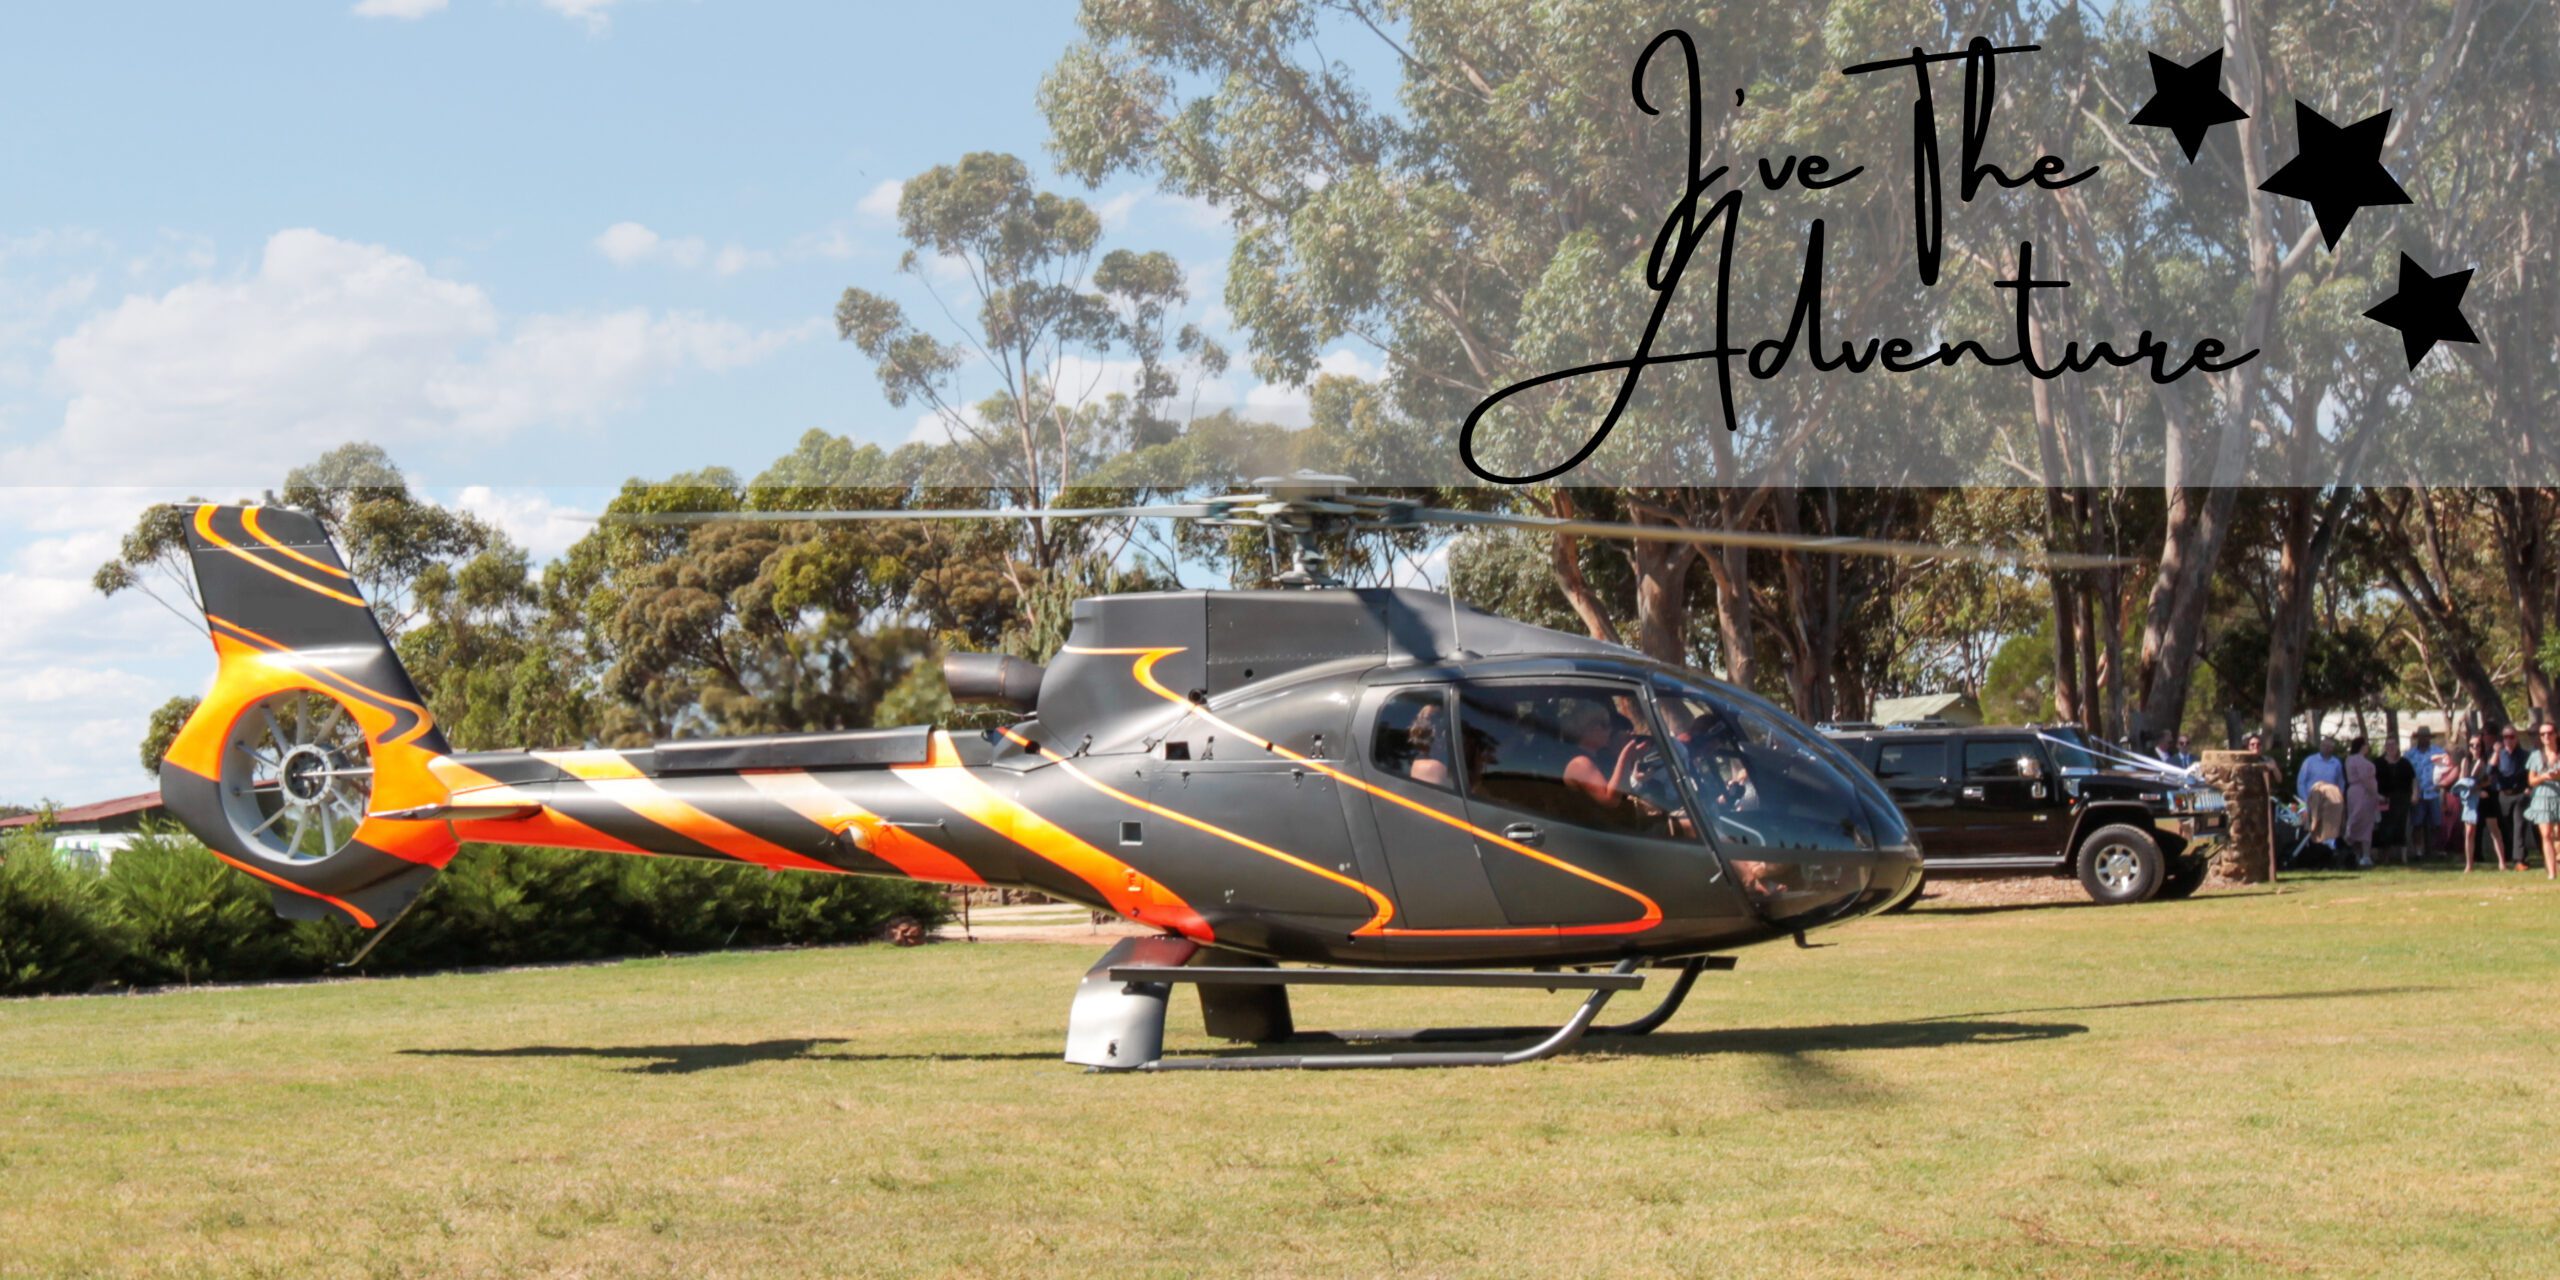 Melbourne helicopter, helicopter, Adventure tours, Red Balloon, Adrenalin,